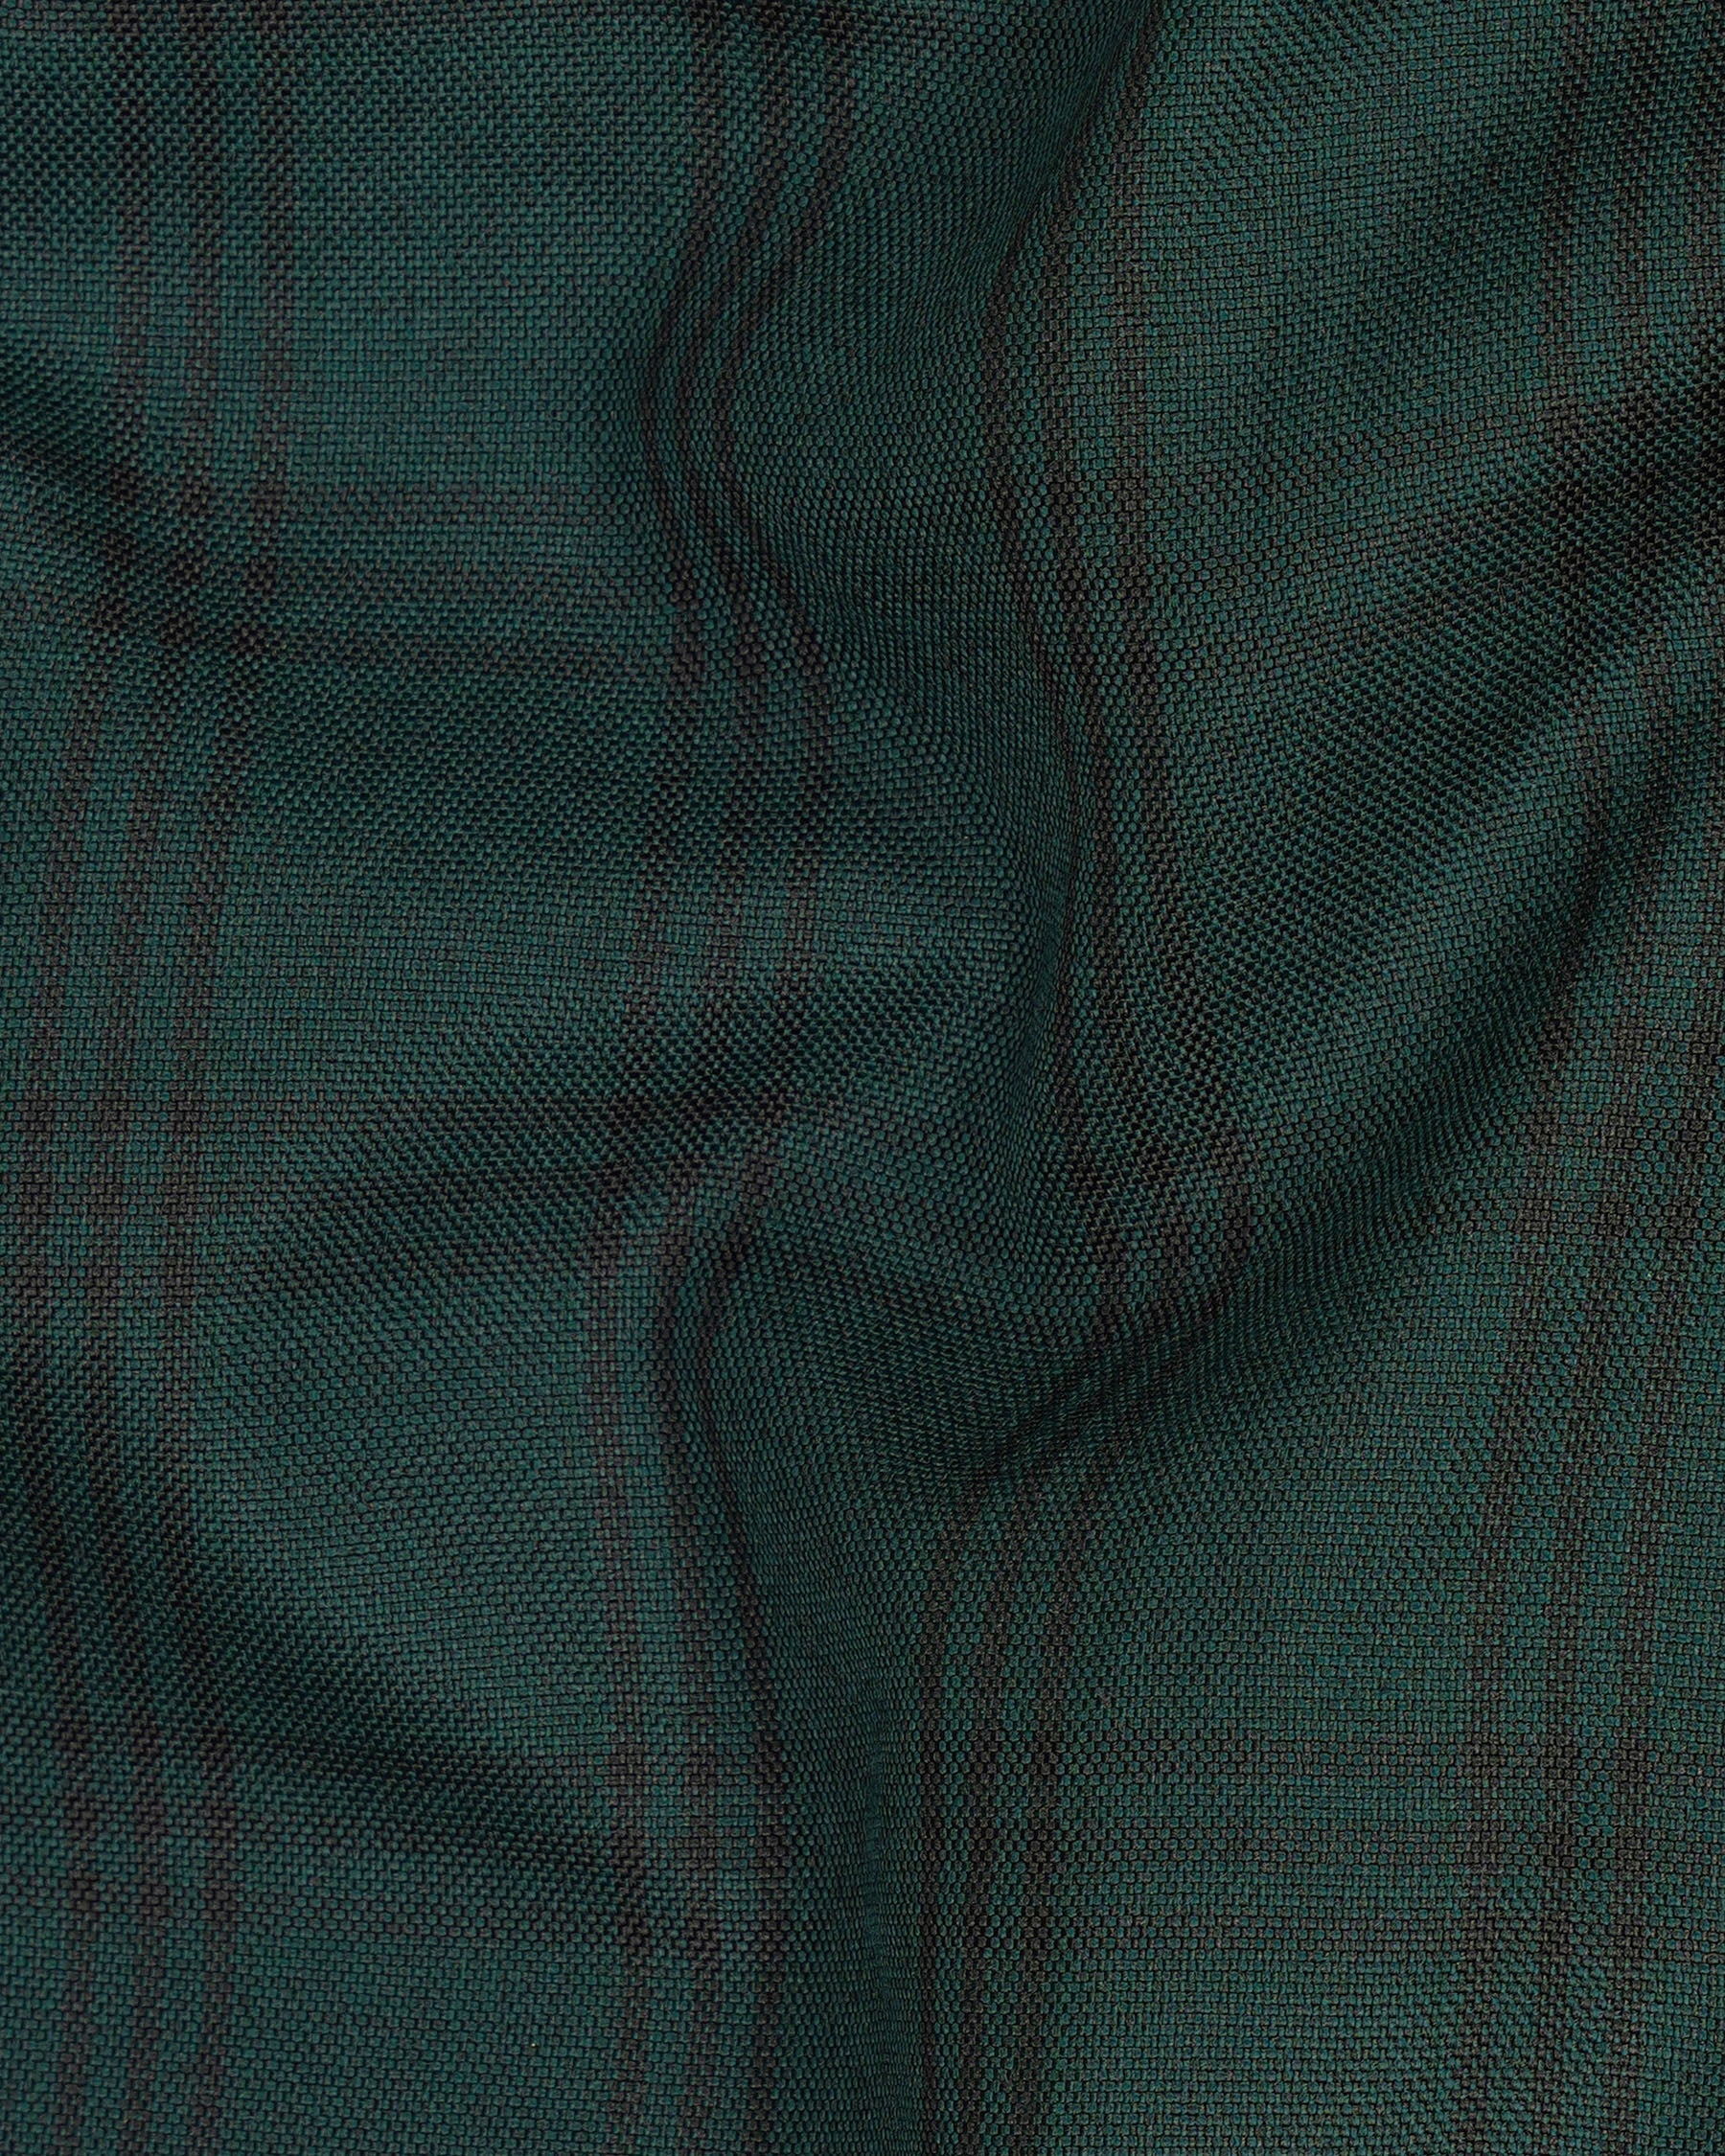 Timber Dark Green With Black Plaid Double Breasted Blazer BL1996-DB-36, BL1996-DB-38, BL1996-DB-40, BL1996-DB-42, BL1996-DB-44, BL1996-DB-46, BL1996-DB-48, BL1996-DB-50, BL1996-DB-52, BL1996-DB-54, BL1996-DB-56, BL1996-DB-58, BL1996-DB-60